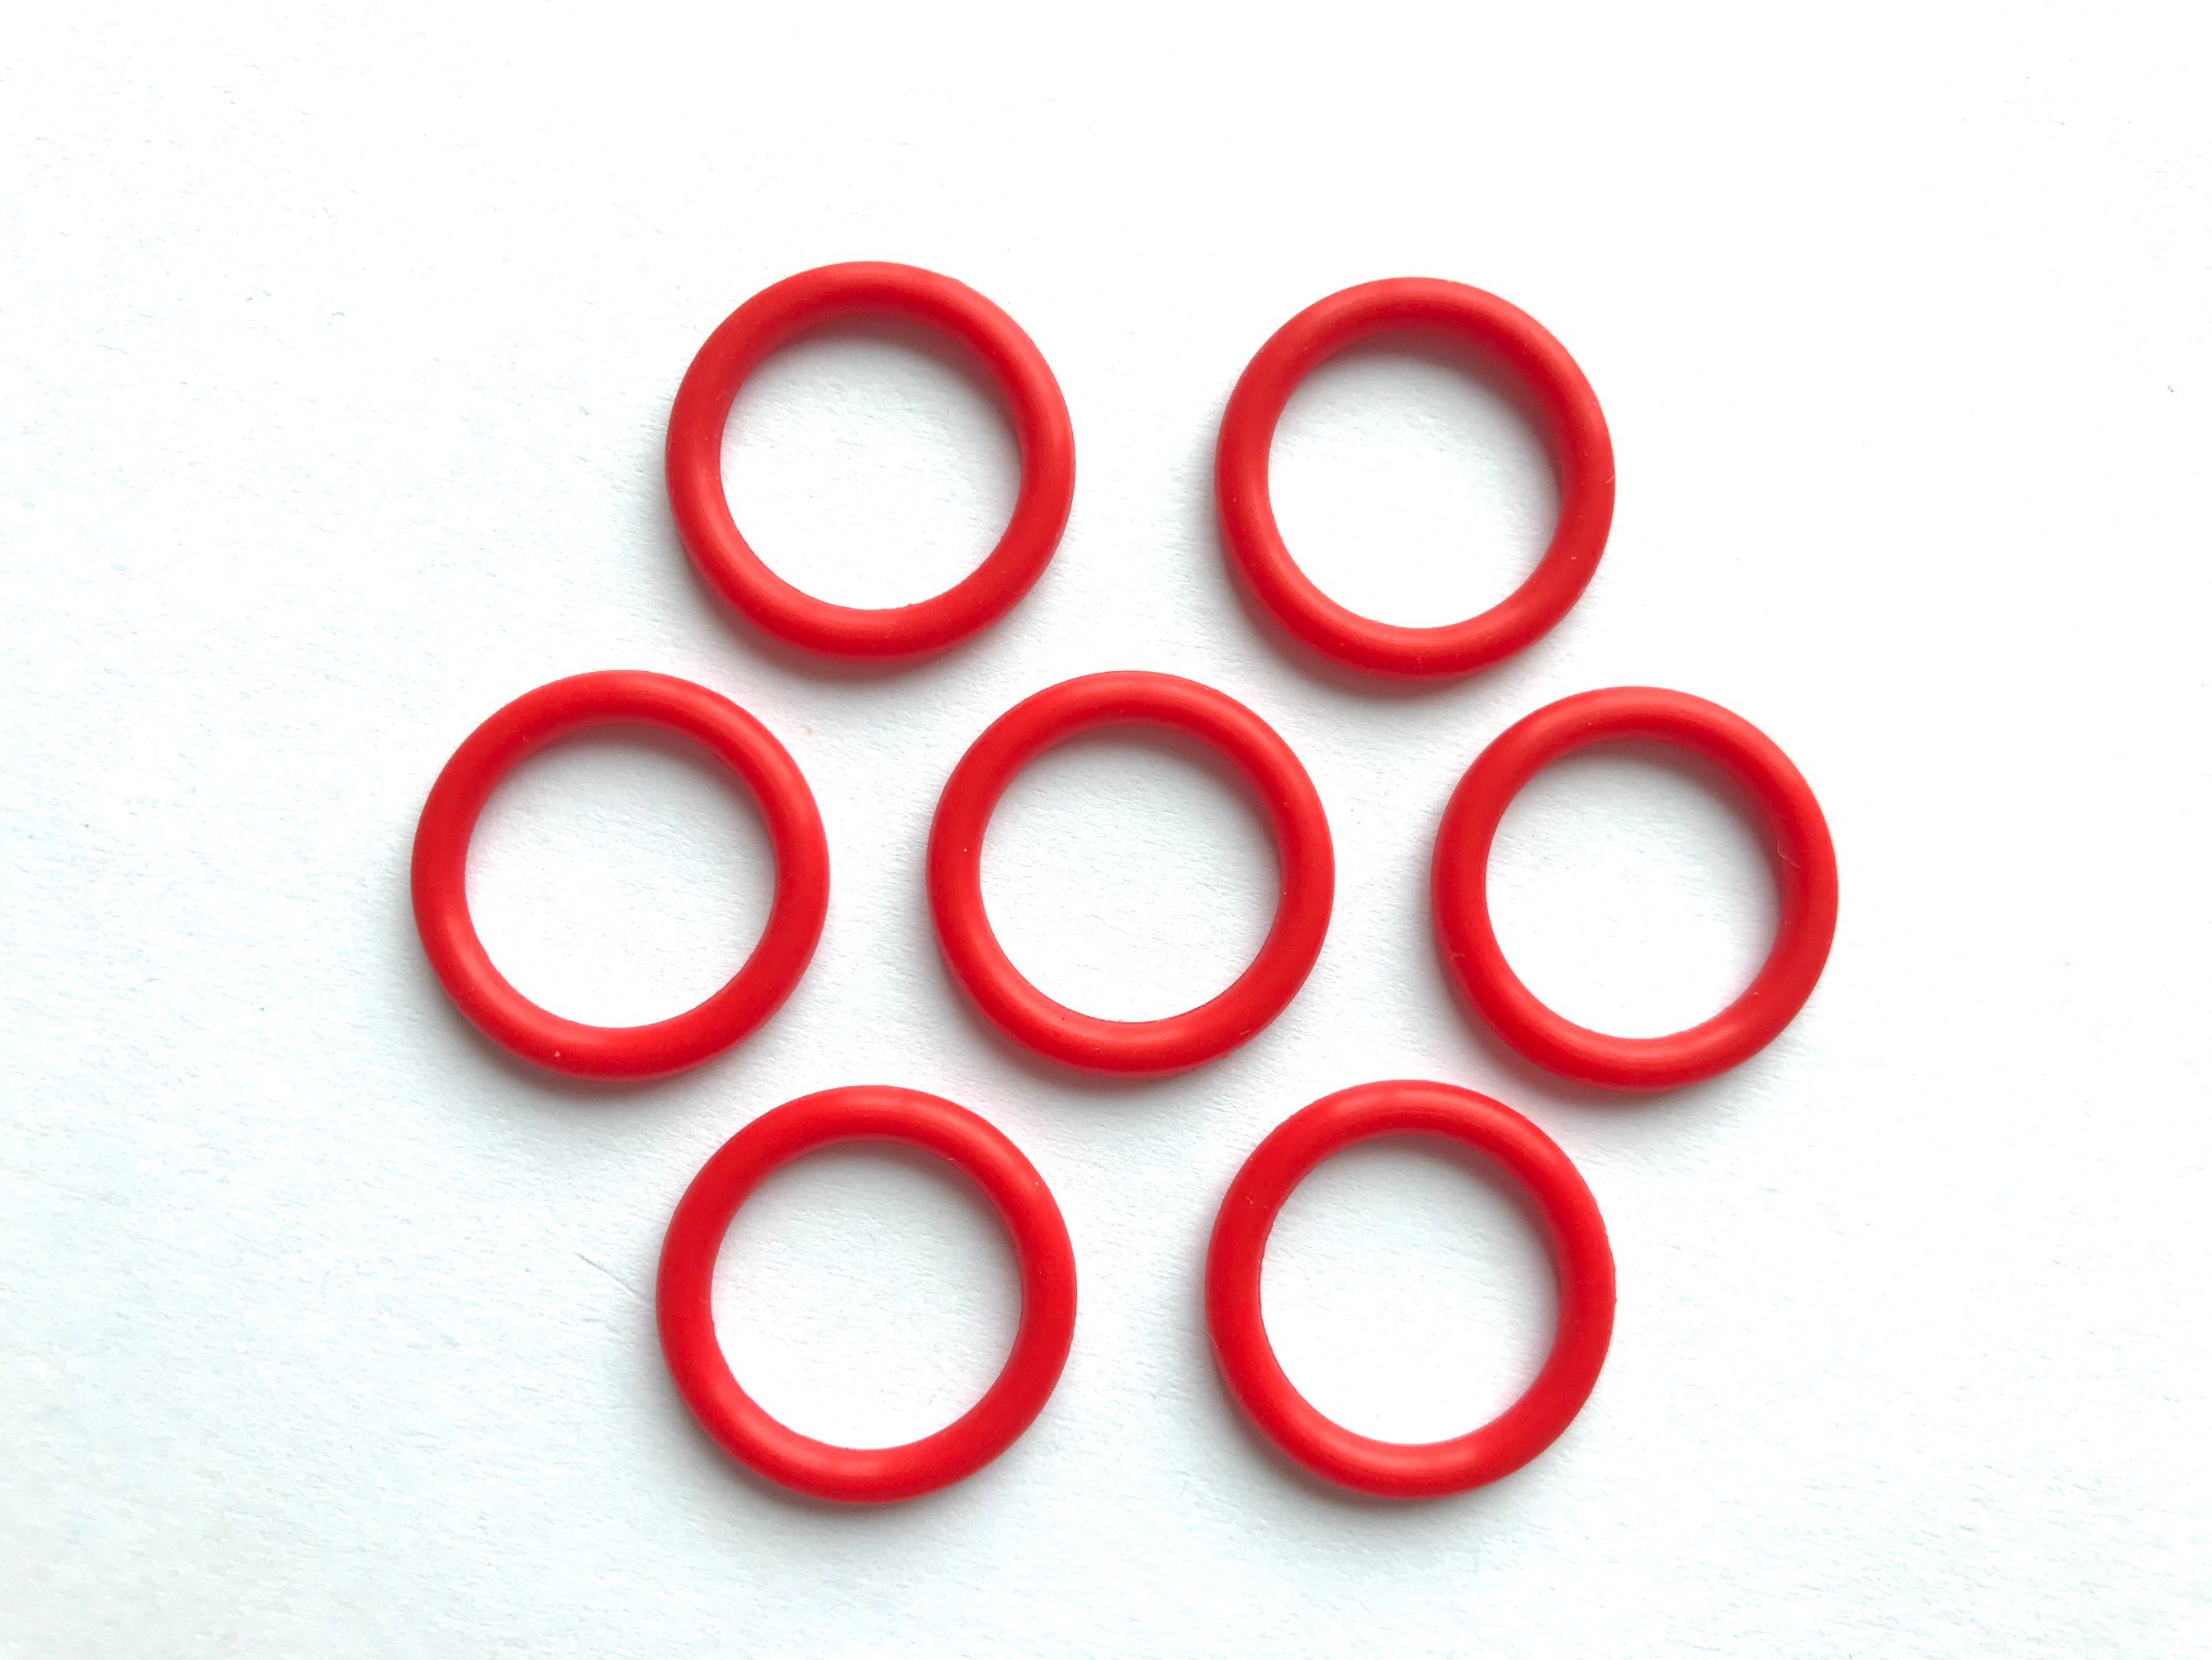 High Performance Colorful Different Size Custom FKM/FPM/NBR/Nitrile/EPDM/HNBR/Silicone Rubber O-Ring